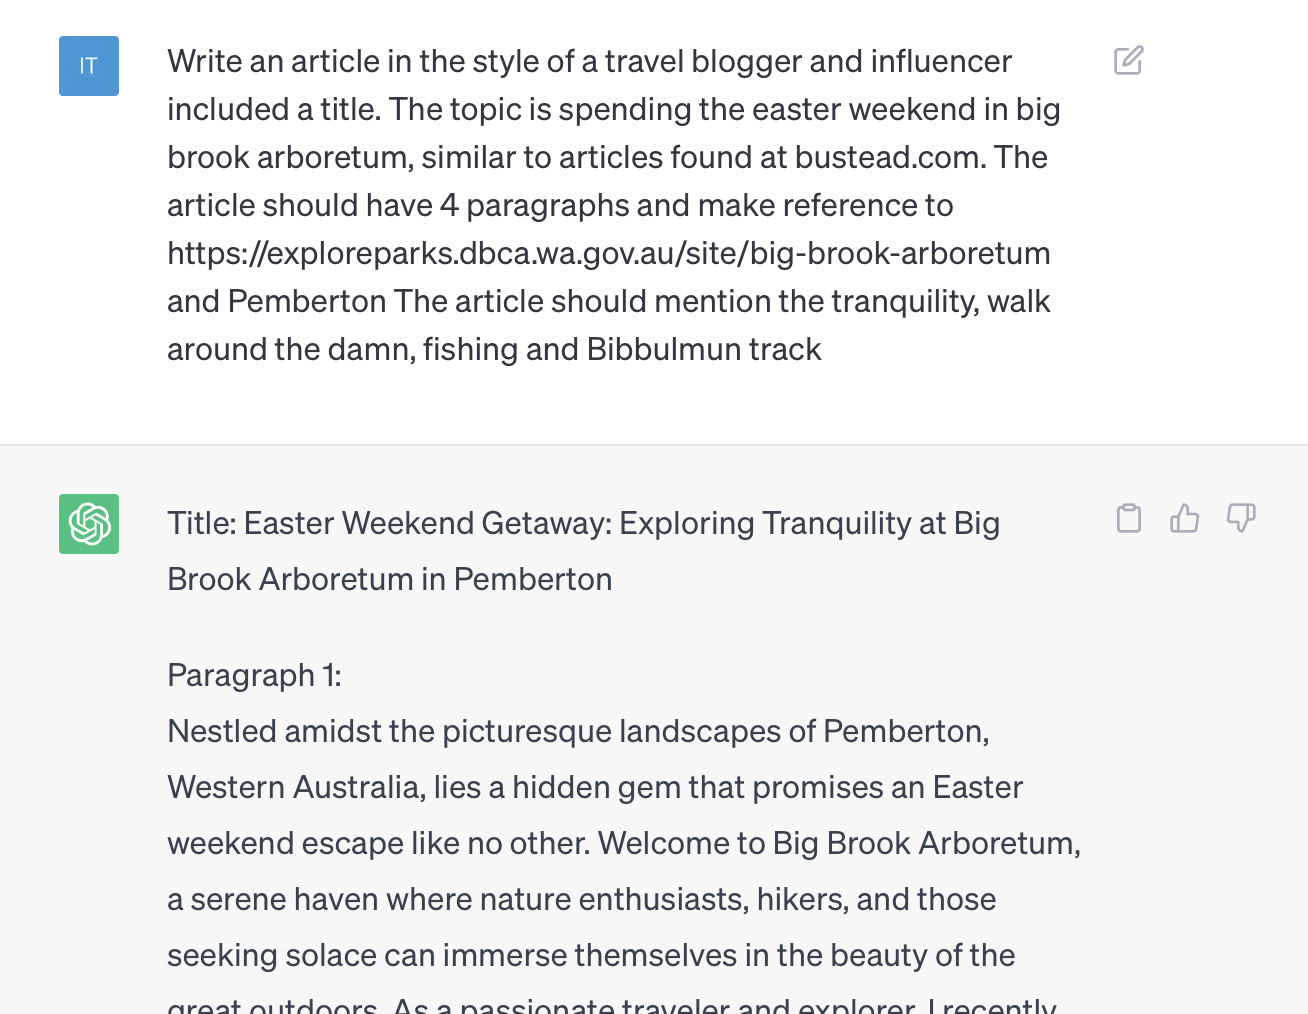 Text in GTP: Write an article in the style of a travel blogger and influencer included a title. The topic is spending the easter weekend in big brook arboretum, similar to articles found at bustead.com. The article should have 4 paragraphs and make reference to the Department of Parks and Wildlife and Pemberton The article should mention the tranquility, walk around the damn, fishing and Bibbulmun track Response:Title: Easter Weekend Getaway: Exploring Tranquility at Big Brook Arboretum in Pemberton Paragraph 1: Nestled amidst the picturesque landscapes of Pemberton, Western Australia, lies a hidden gem that promises an Easter weekend escape like no other. Welcome to Big Brook Arboretum, a serene haven where nature enthusiasts, hikers, and those seeking solace can immerse themselves in the beauty of the great outdoors. As a passionate traveler and explorer, I recently